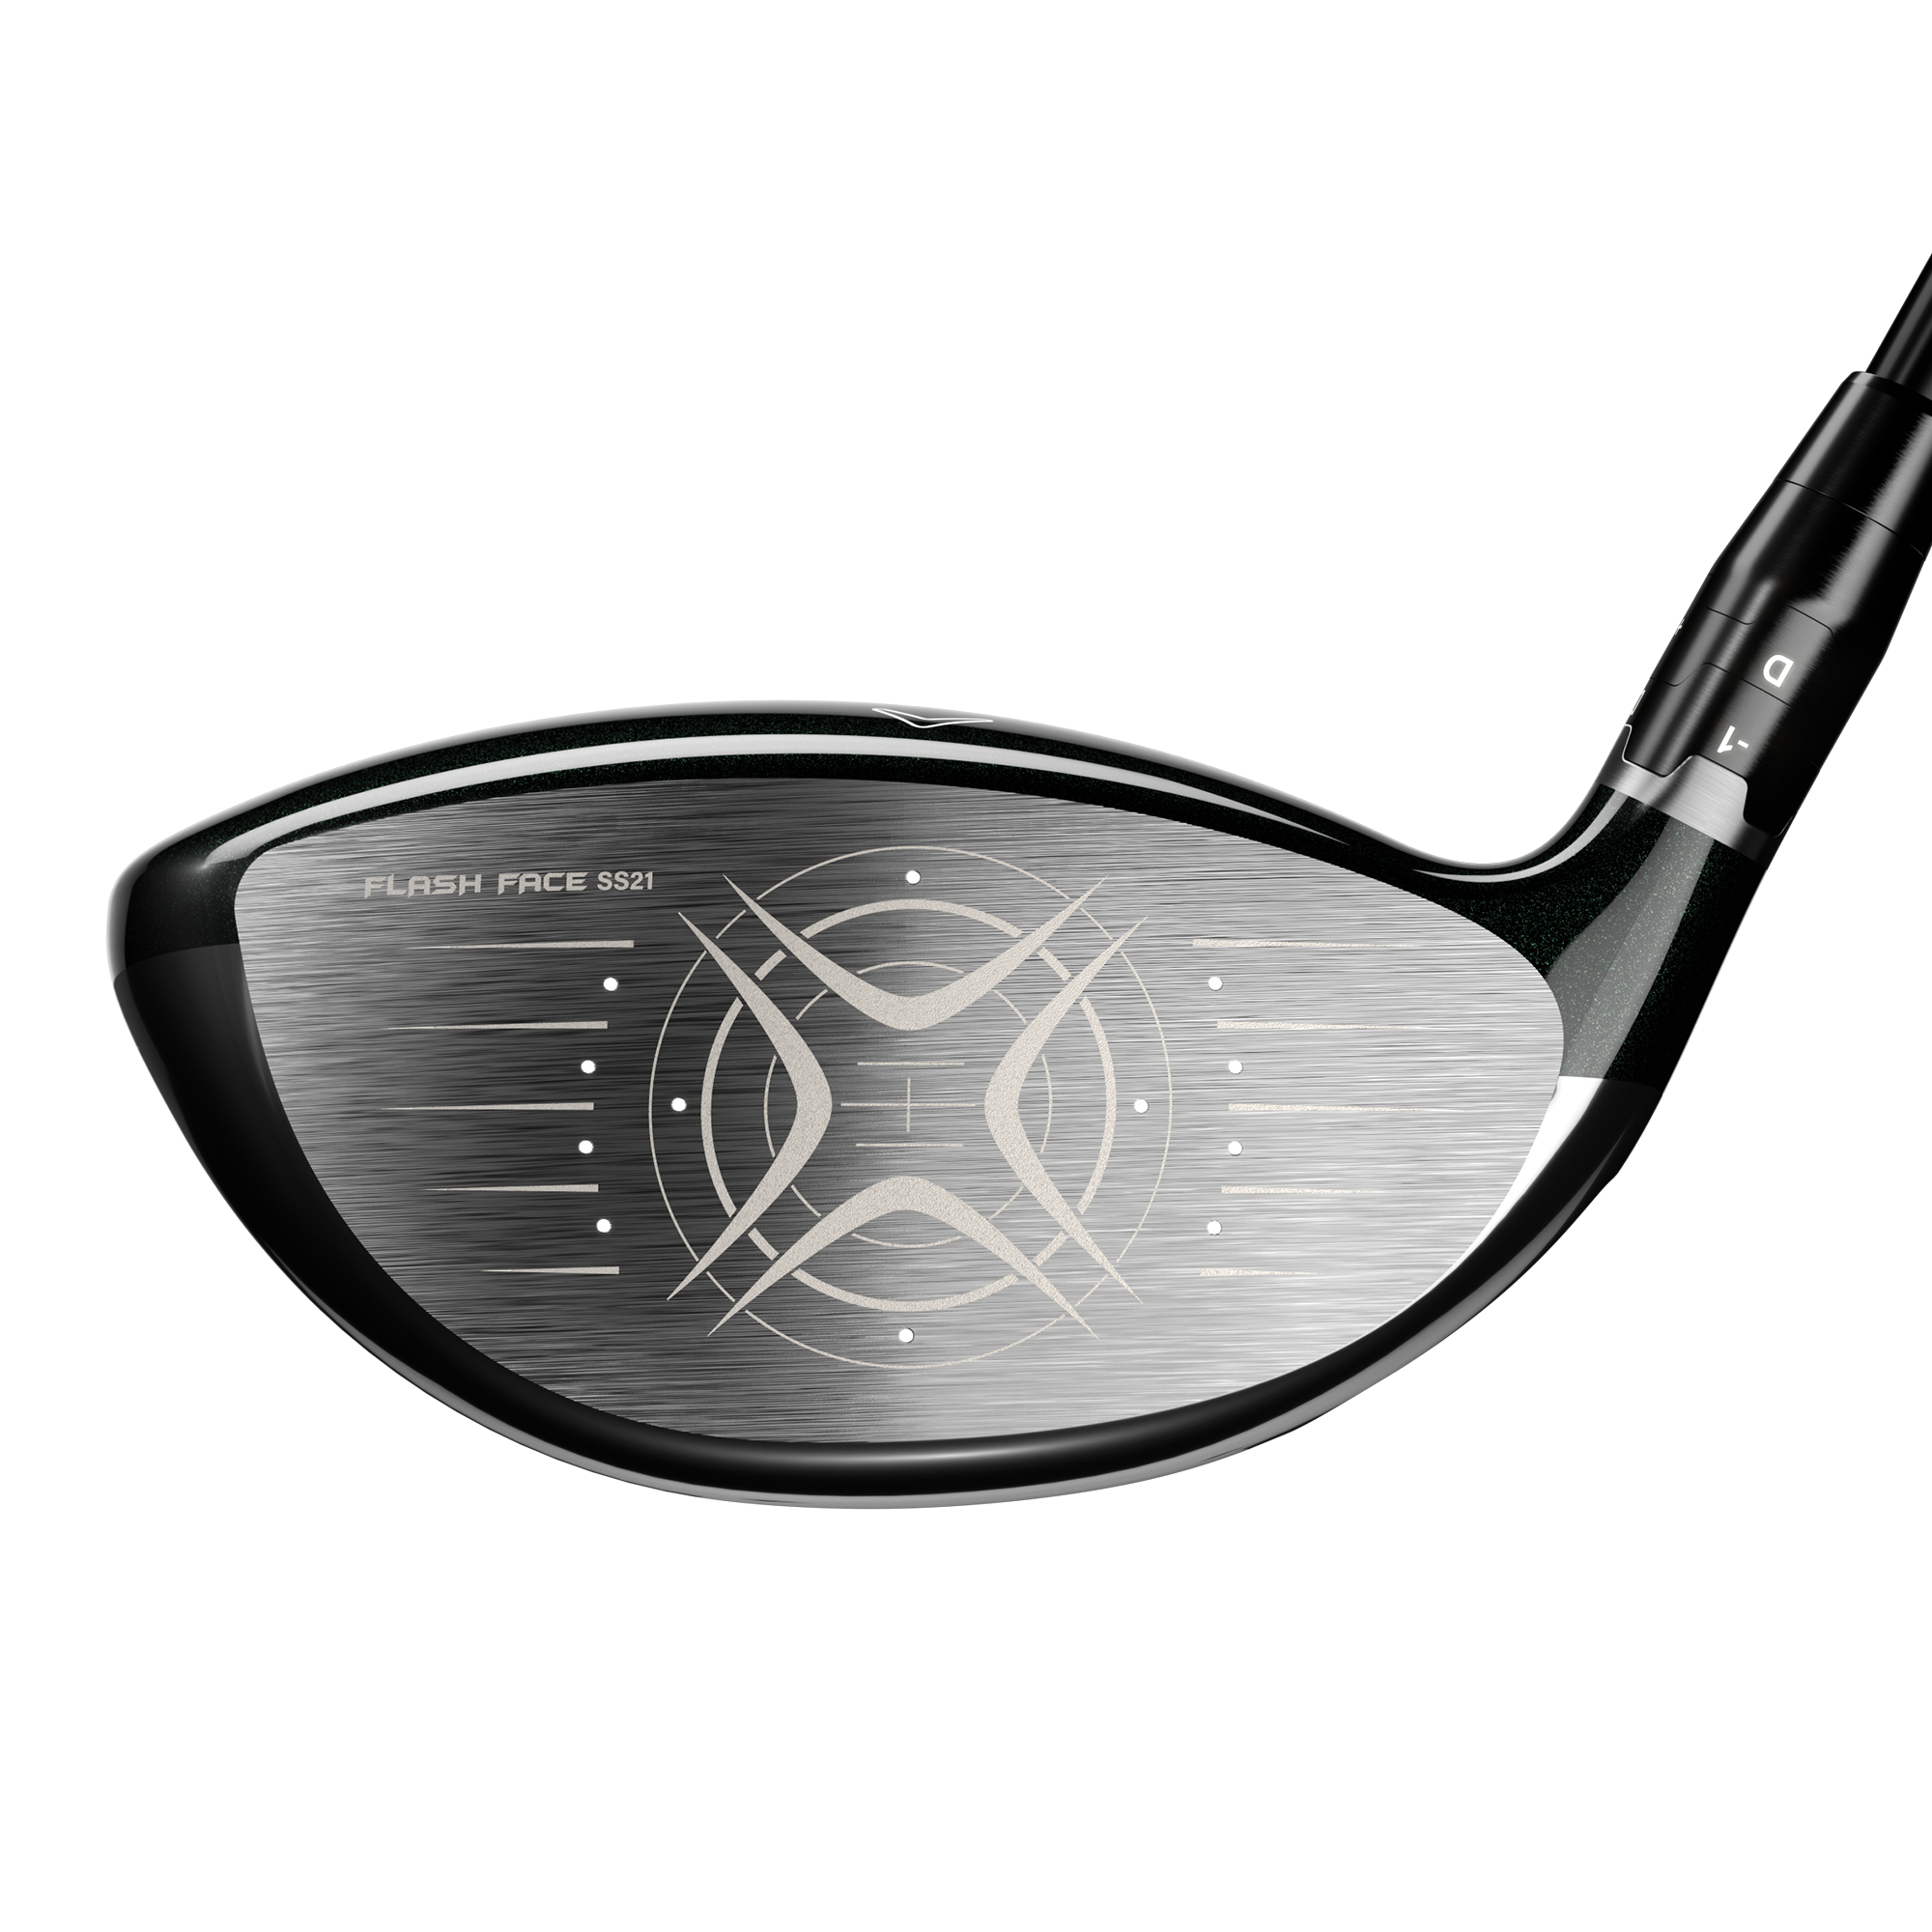 Women’s Epic MAX Drivers